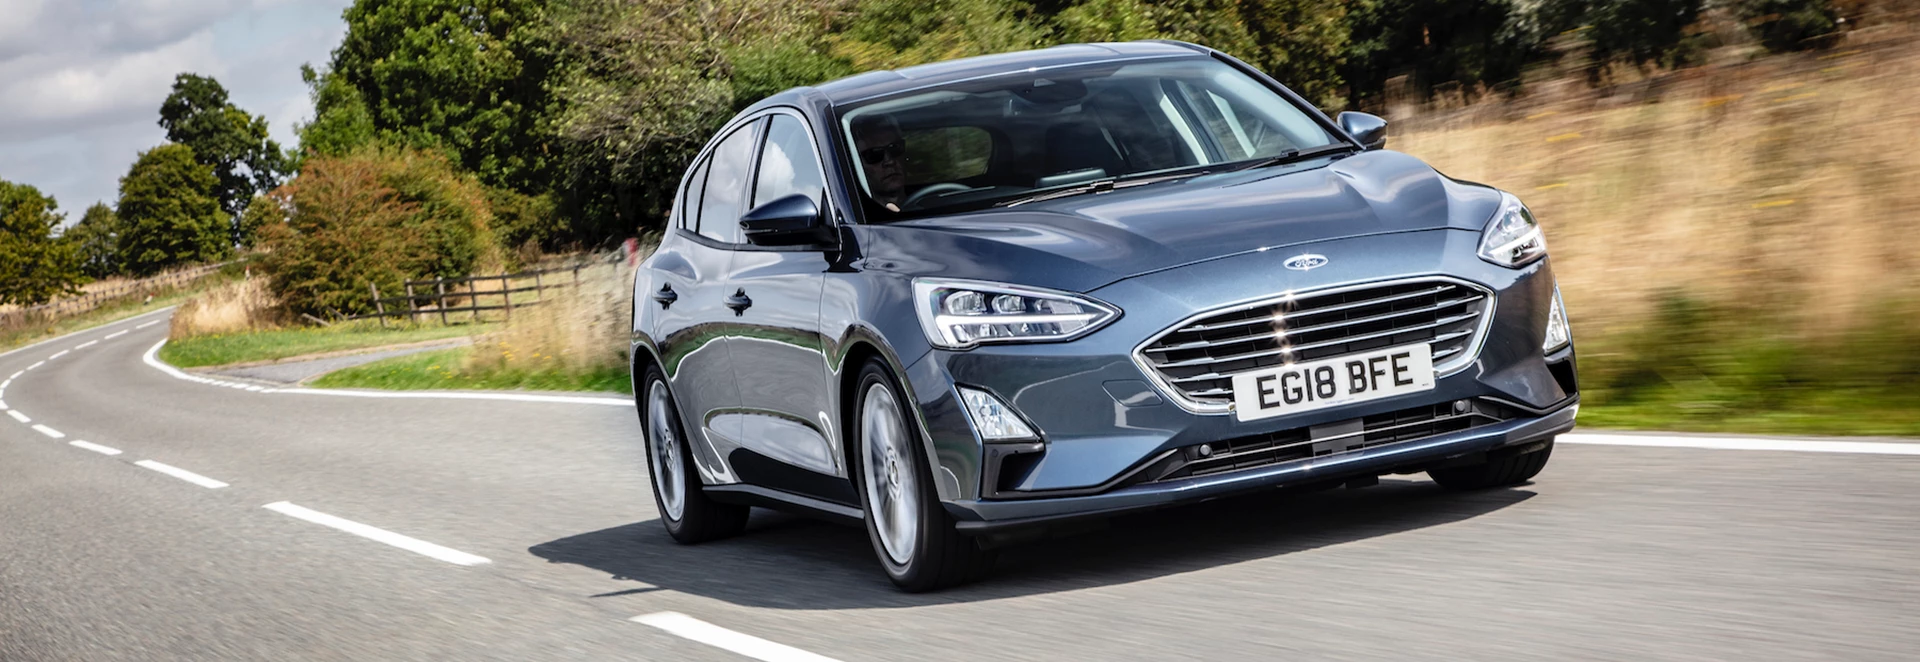 Buyer’s guide to the Ford Focus 